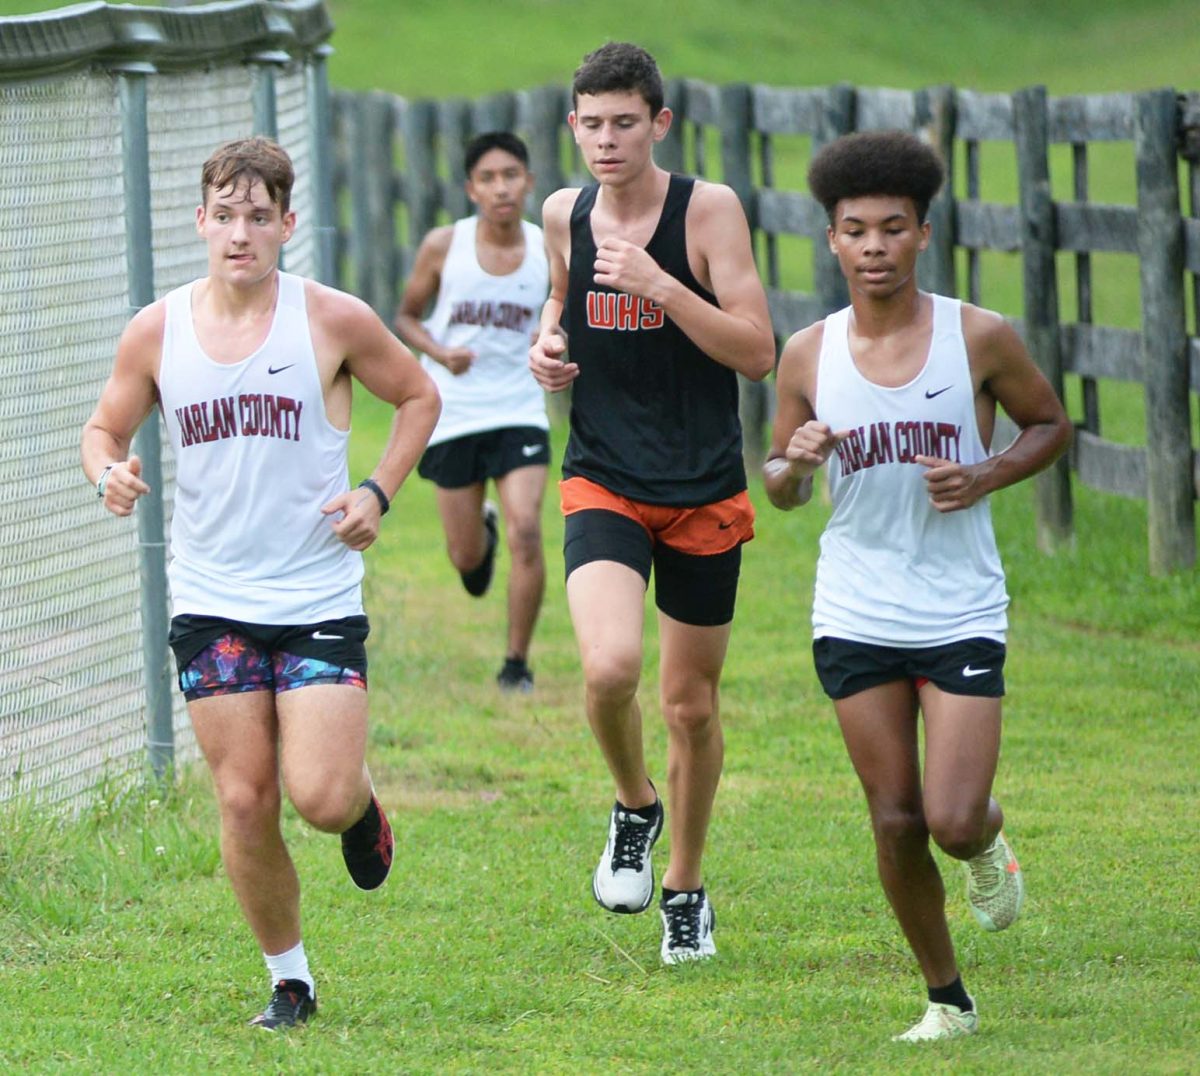 Harlan County runners Ethan Simpson (left) and DaShaun Smith competed in a meet Tuesday at Harlan County High School.